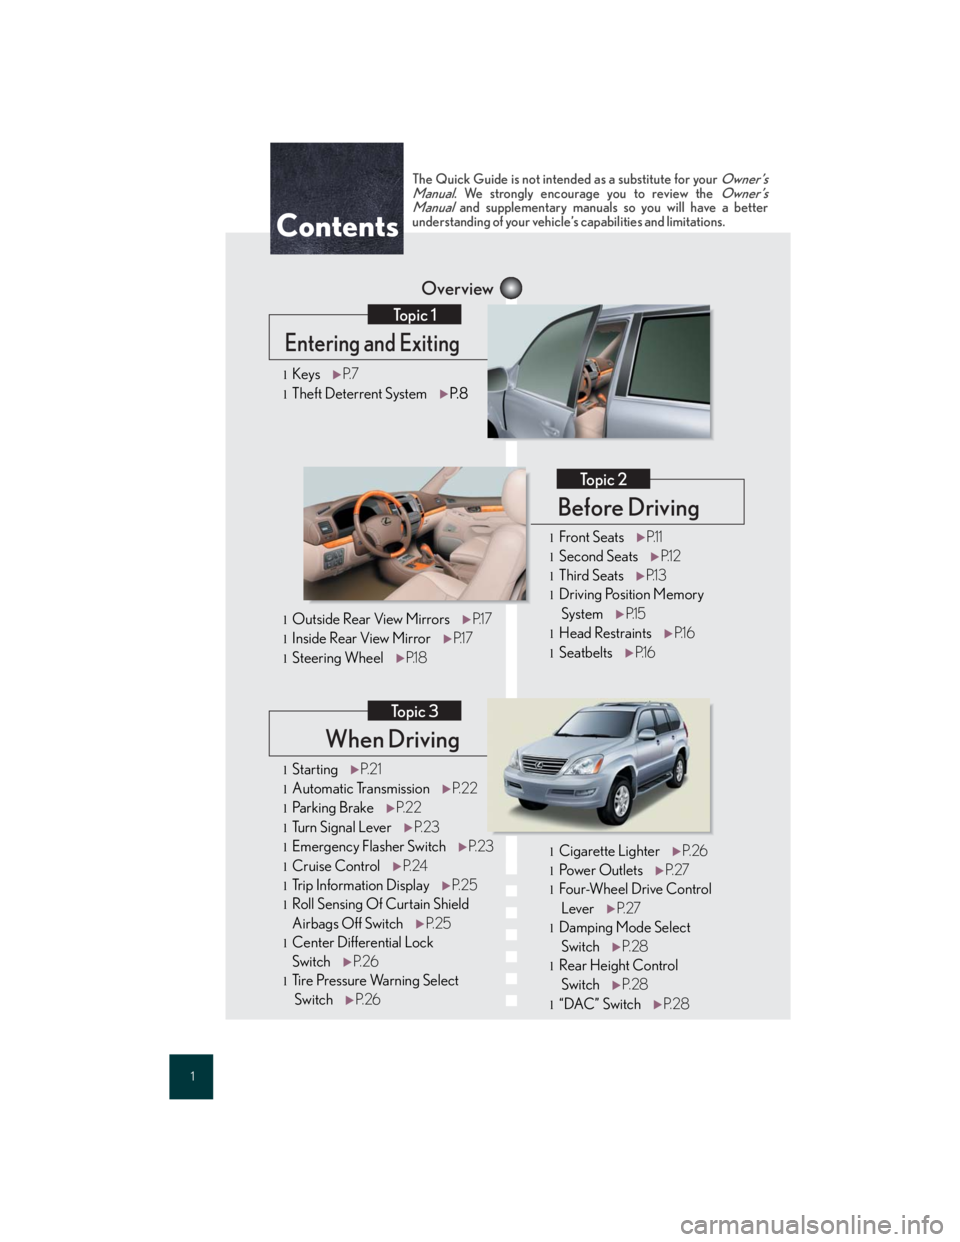 Lexus GX470 2007  Audio/Video System / LEXUS 2007 GX470 QUICK REFERENCE MANUAL 1
When Driving
Topic 3
Overview
Contents
Entering and Exiting
Topic 1
Before Driving
Topic 2
lStartingP. 2 1
lAutomatic TransmissionP. 2 2
lParking BrakeP. 2 2
lTu r n  S i g n a l  L e v e rP. 2 3
lE